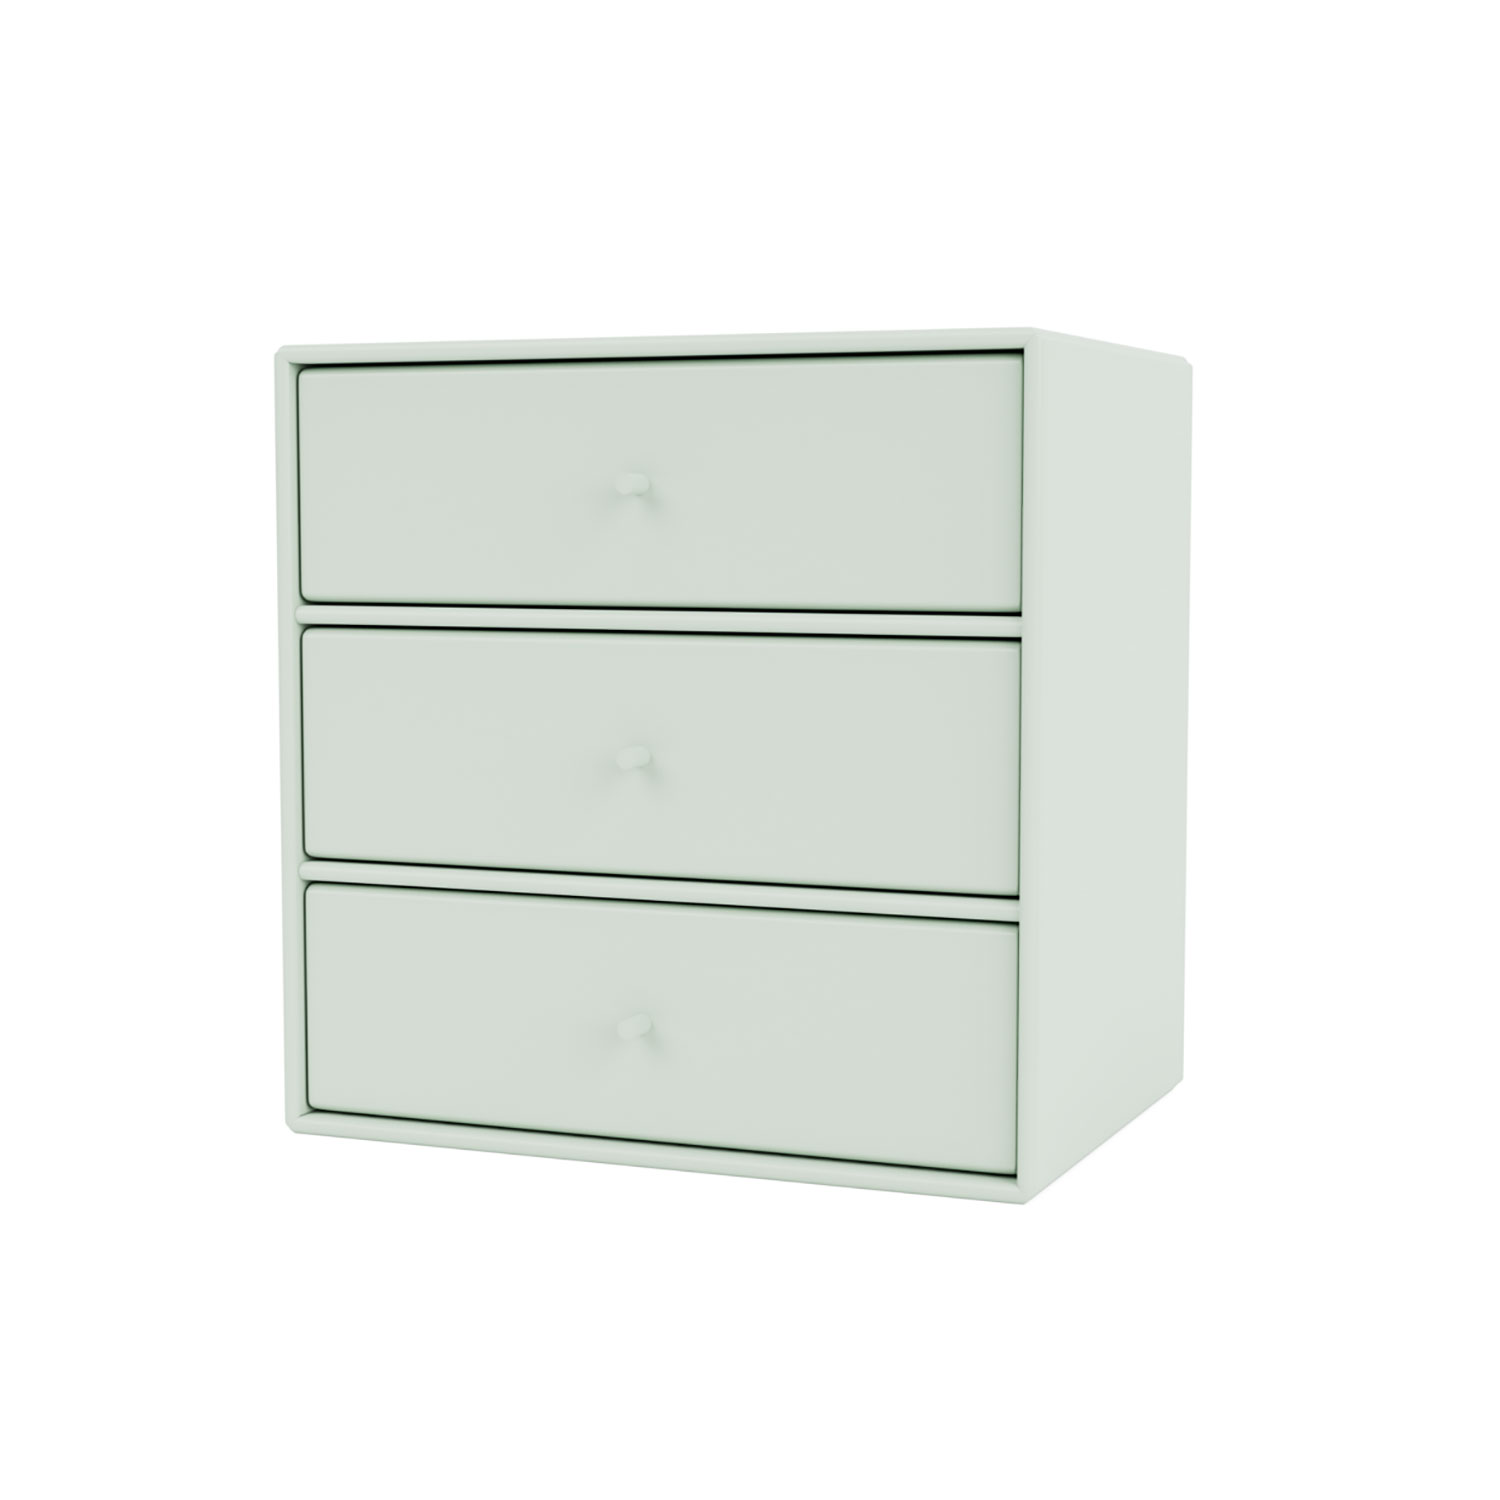 Mini 1007 with three drawers, 5 colors